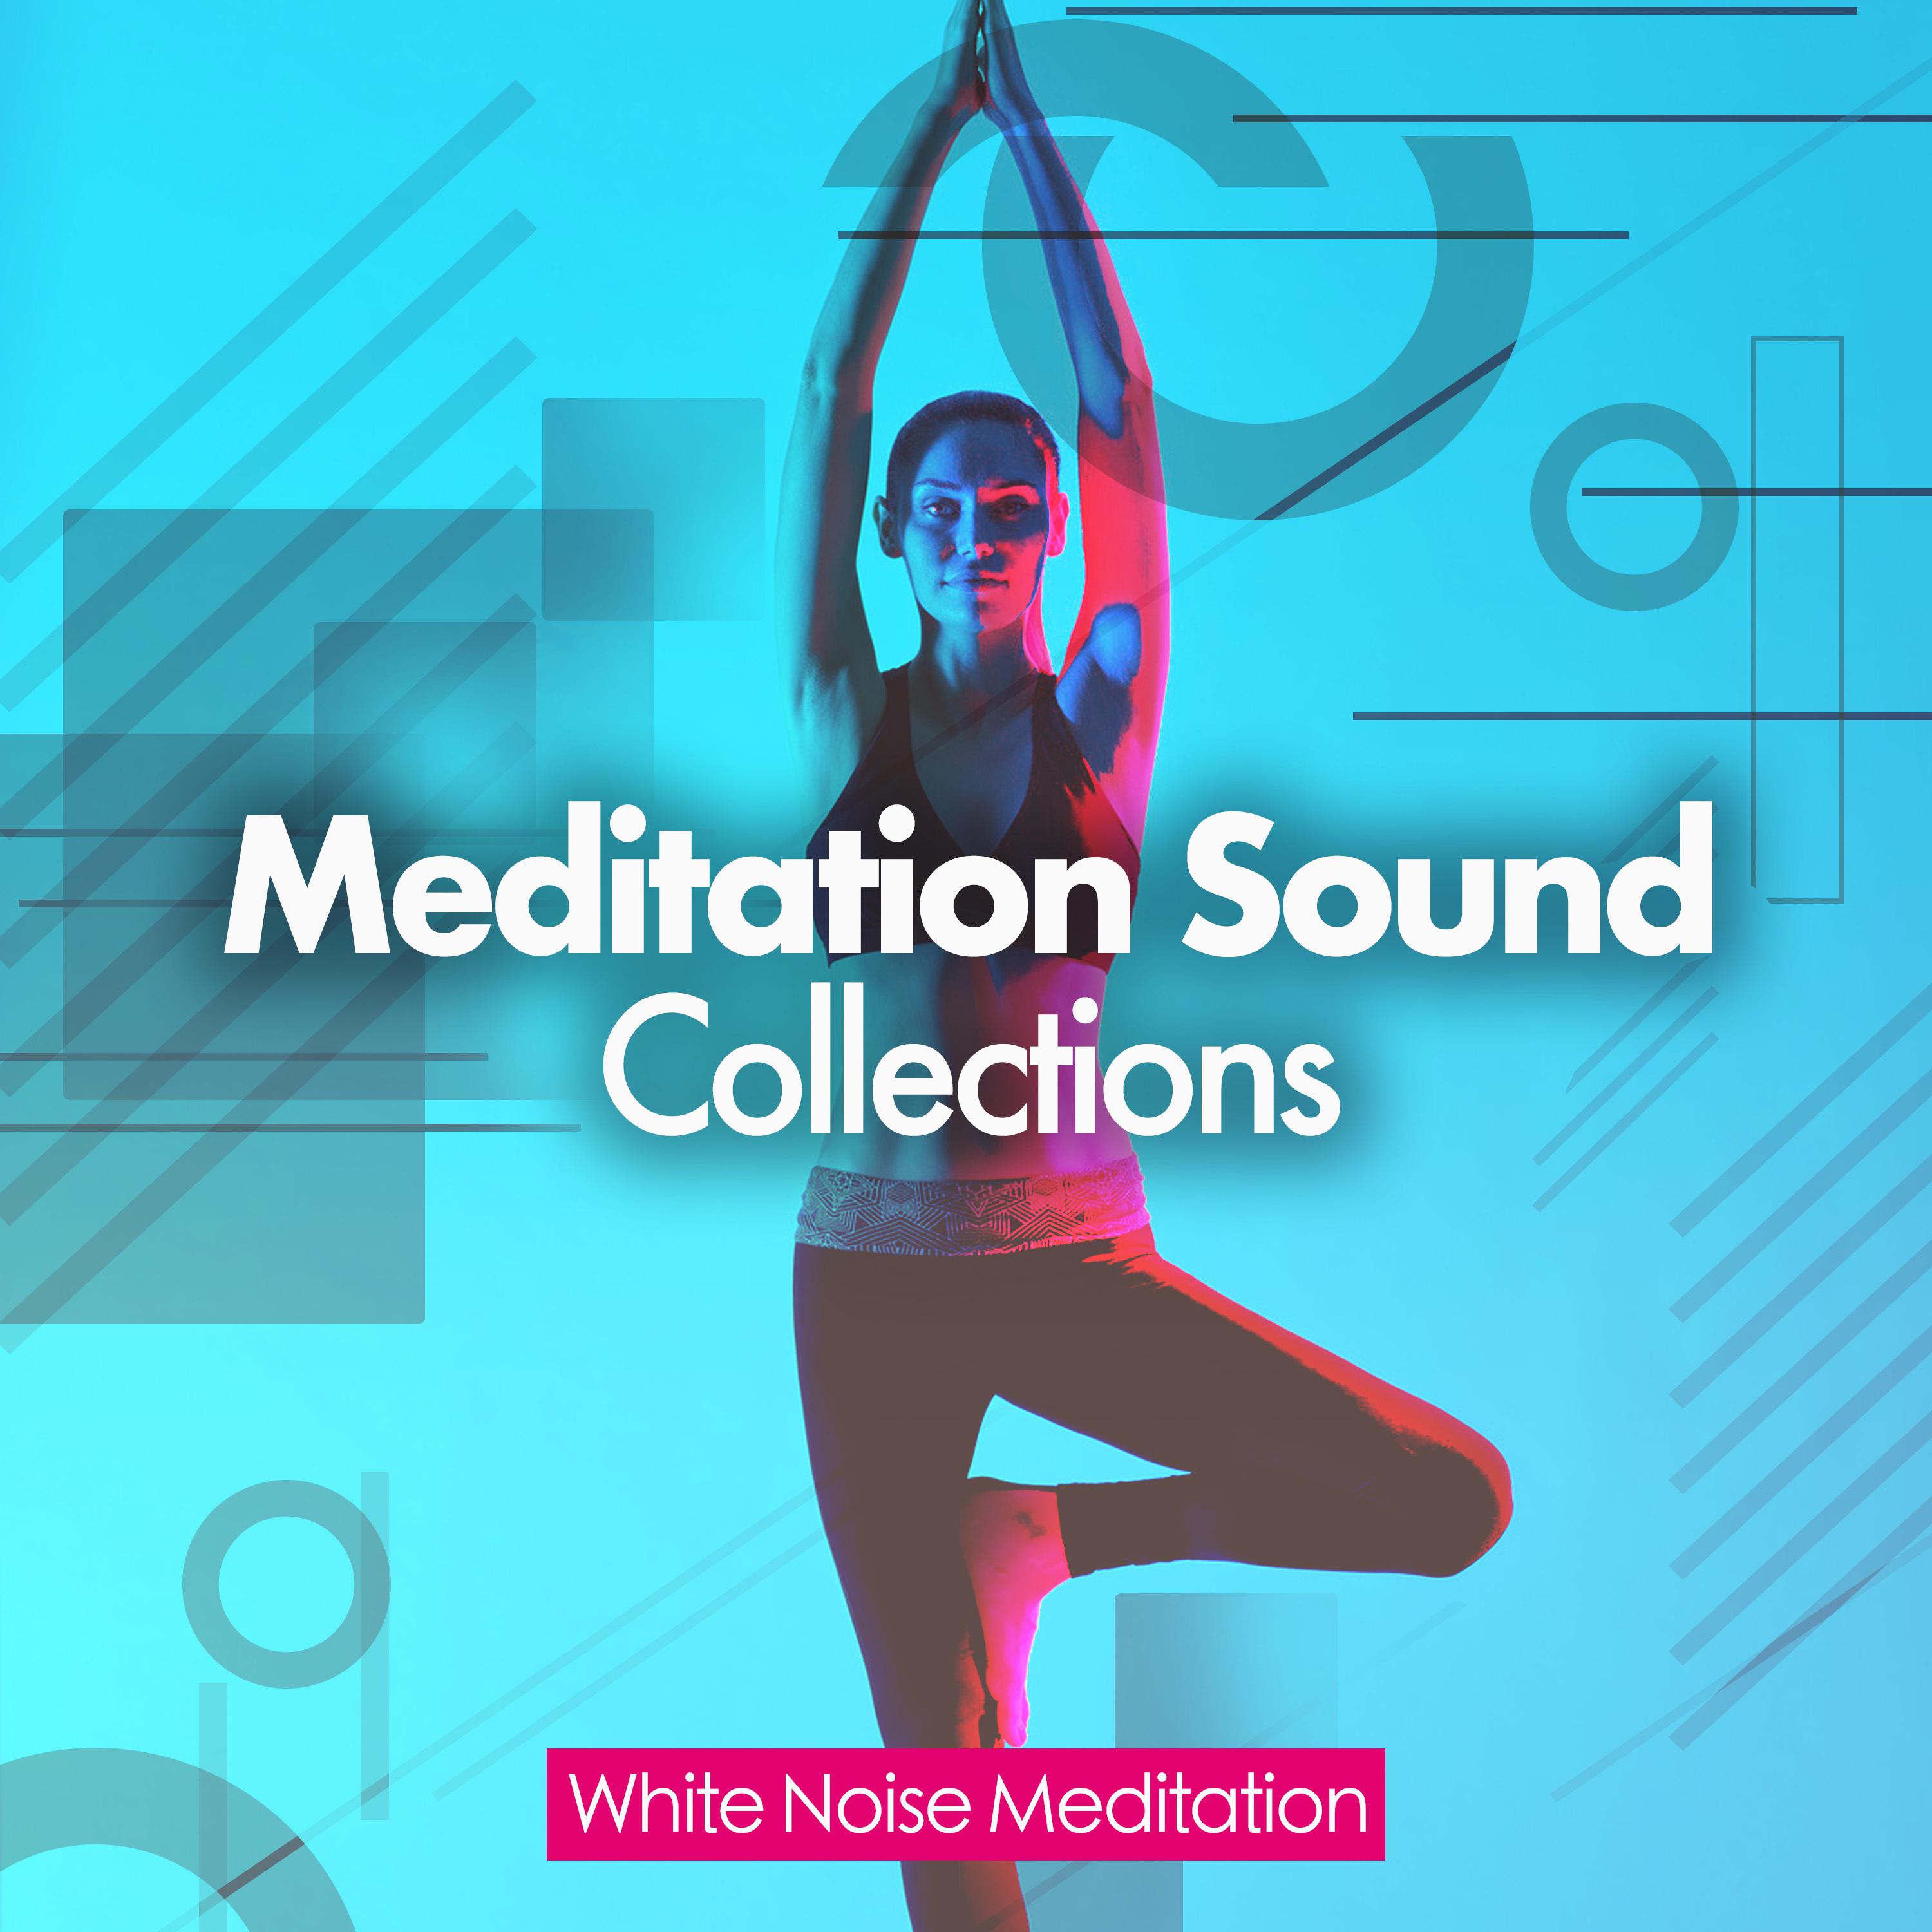 Meditation Sound Collections